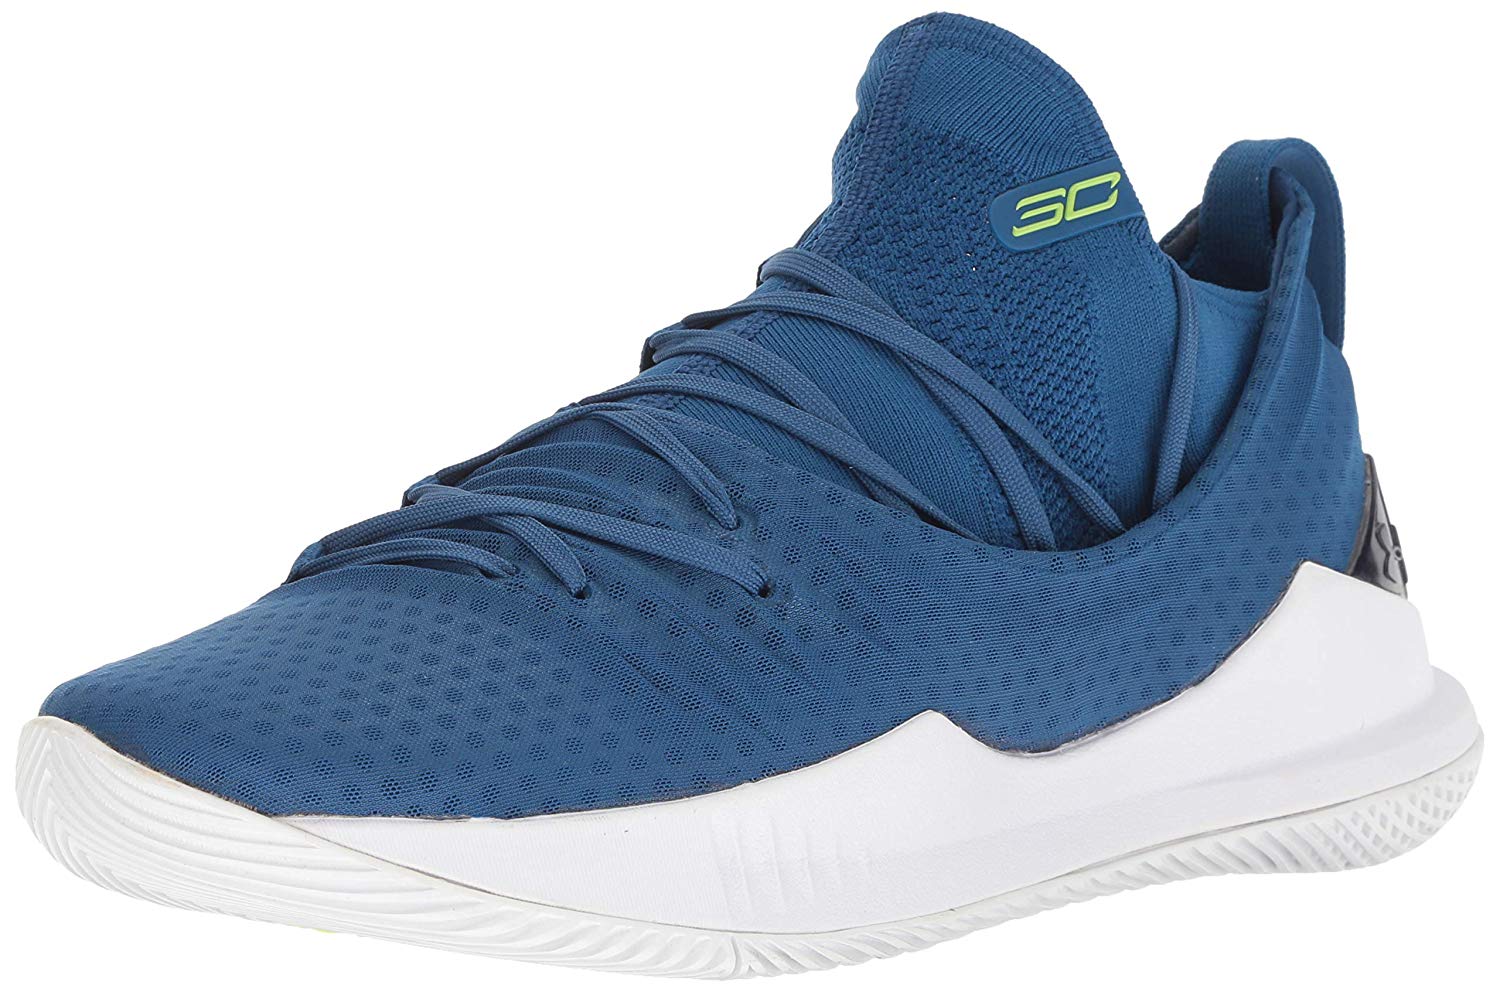 Under Armour Men's Curry 5 Basketball Shoe, Blue, Size 14.0 8Scb | eBay